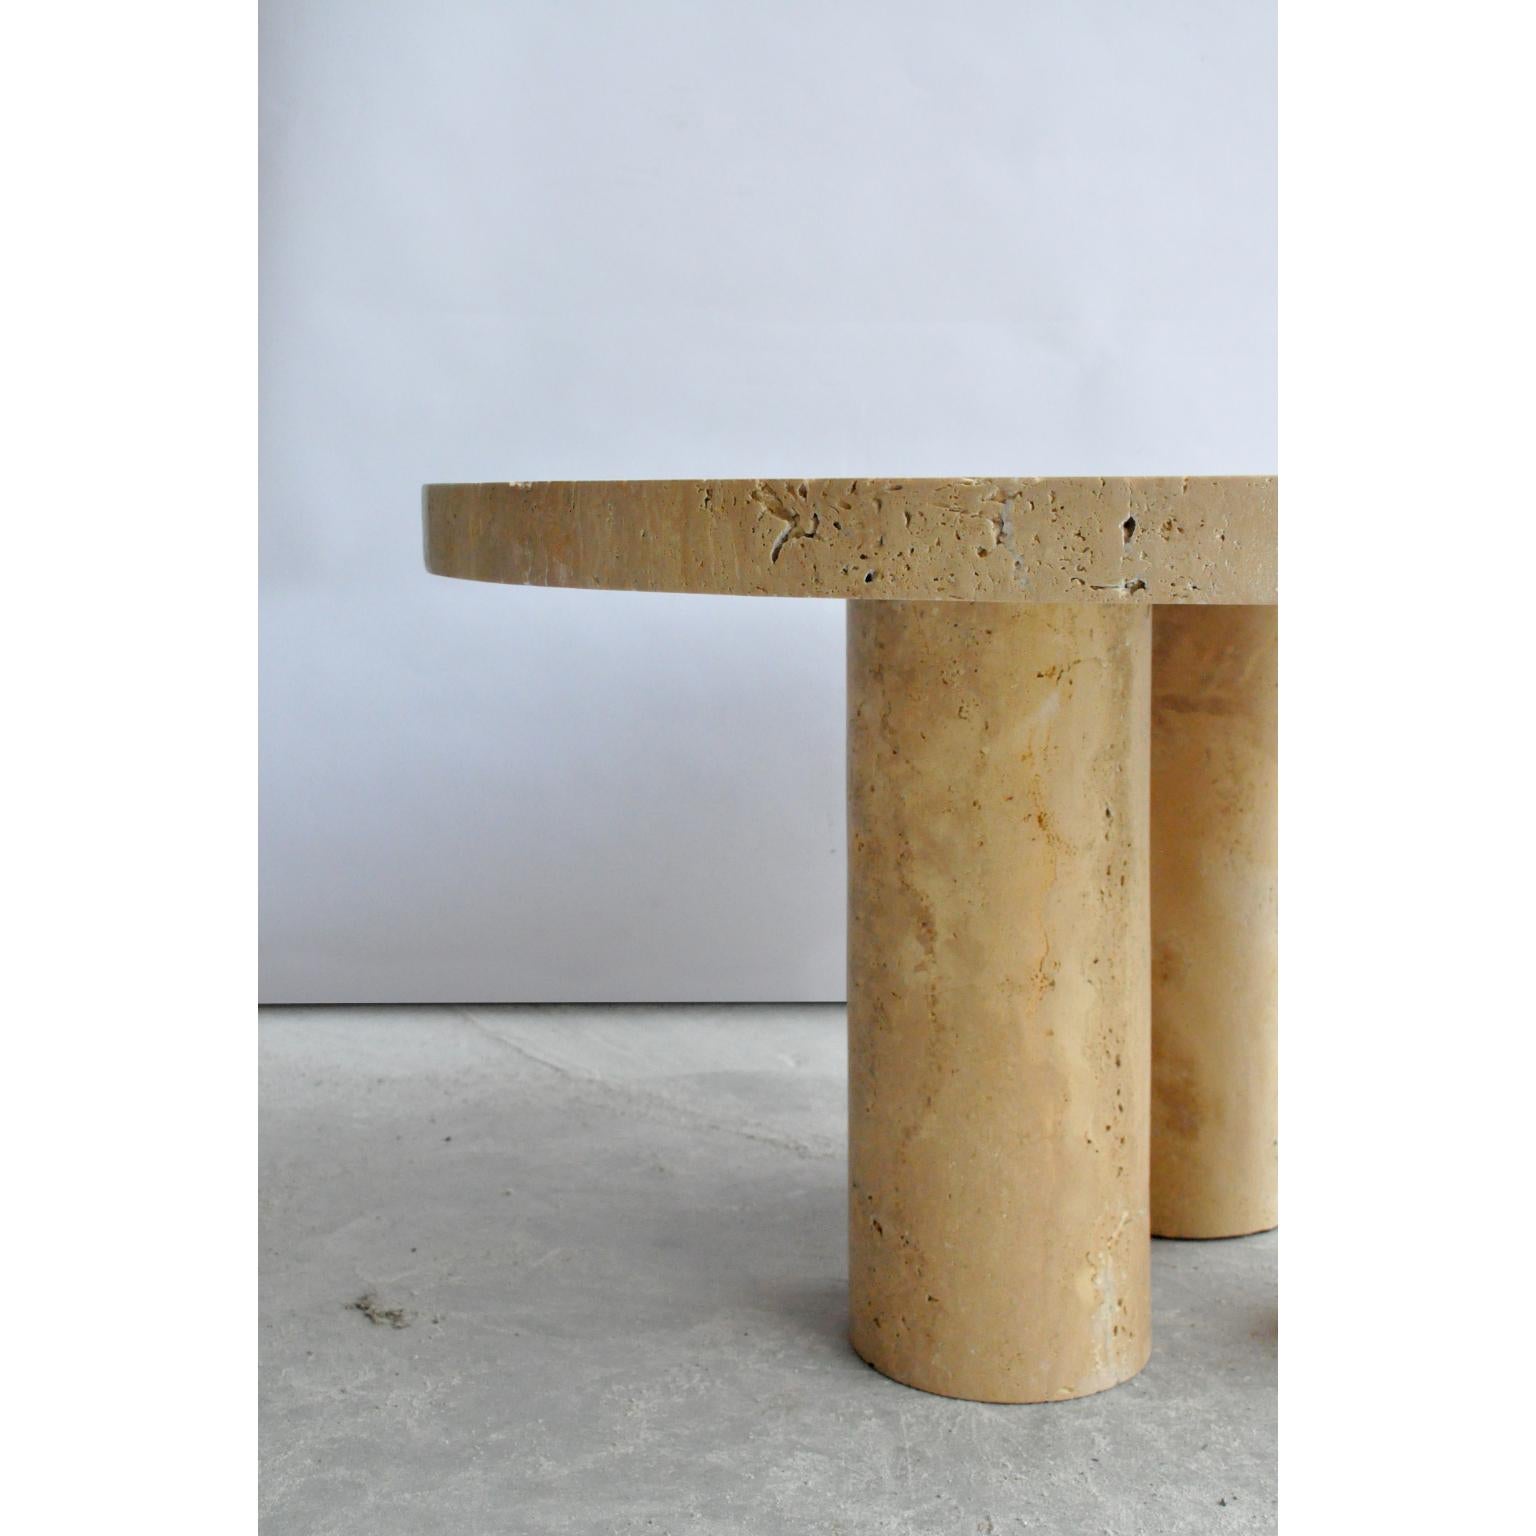 Other Sculptural Cuddle Coffee Table 54 by Pietro Franceschini